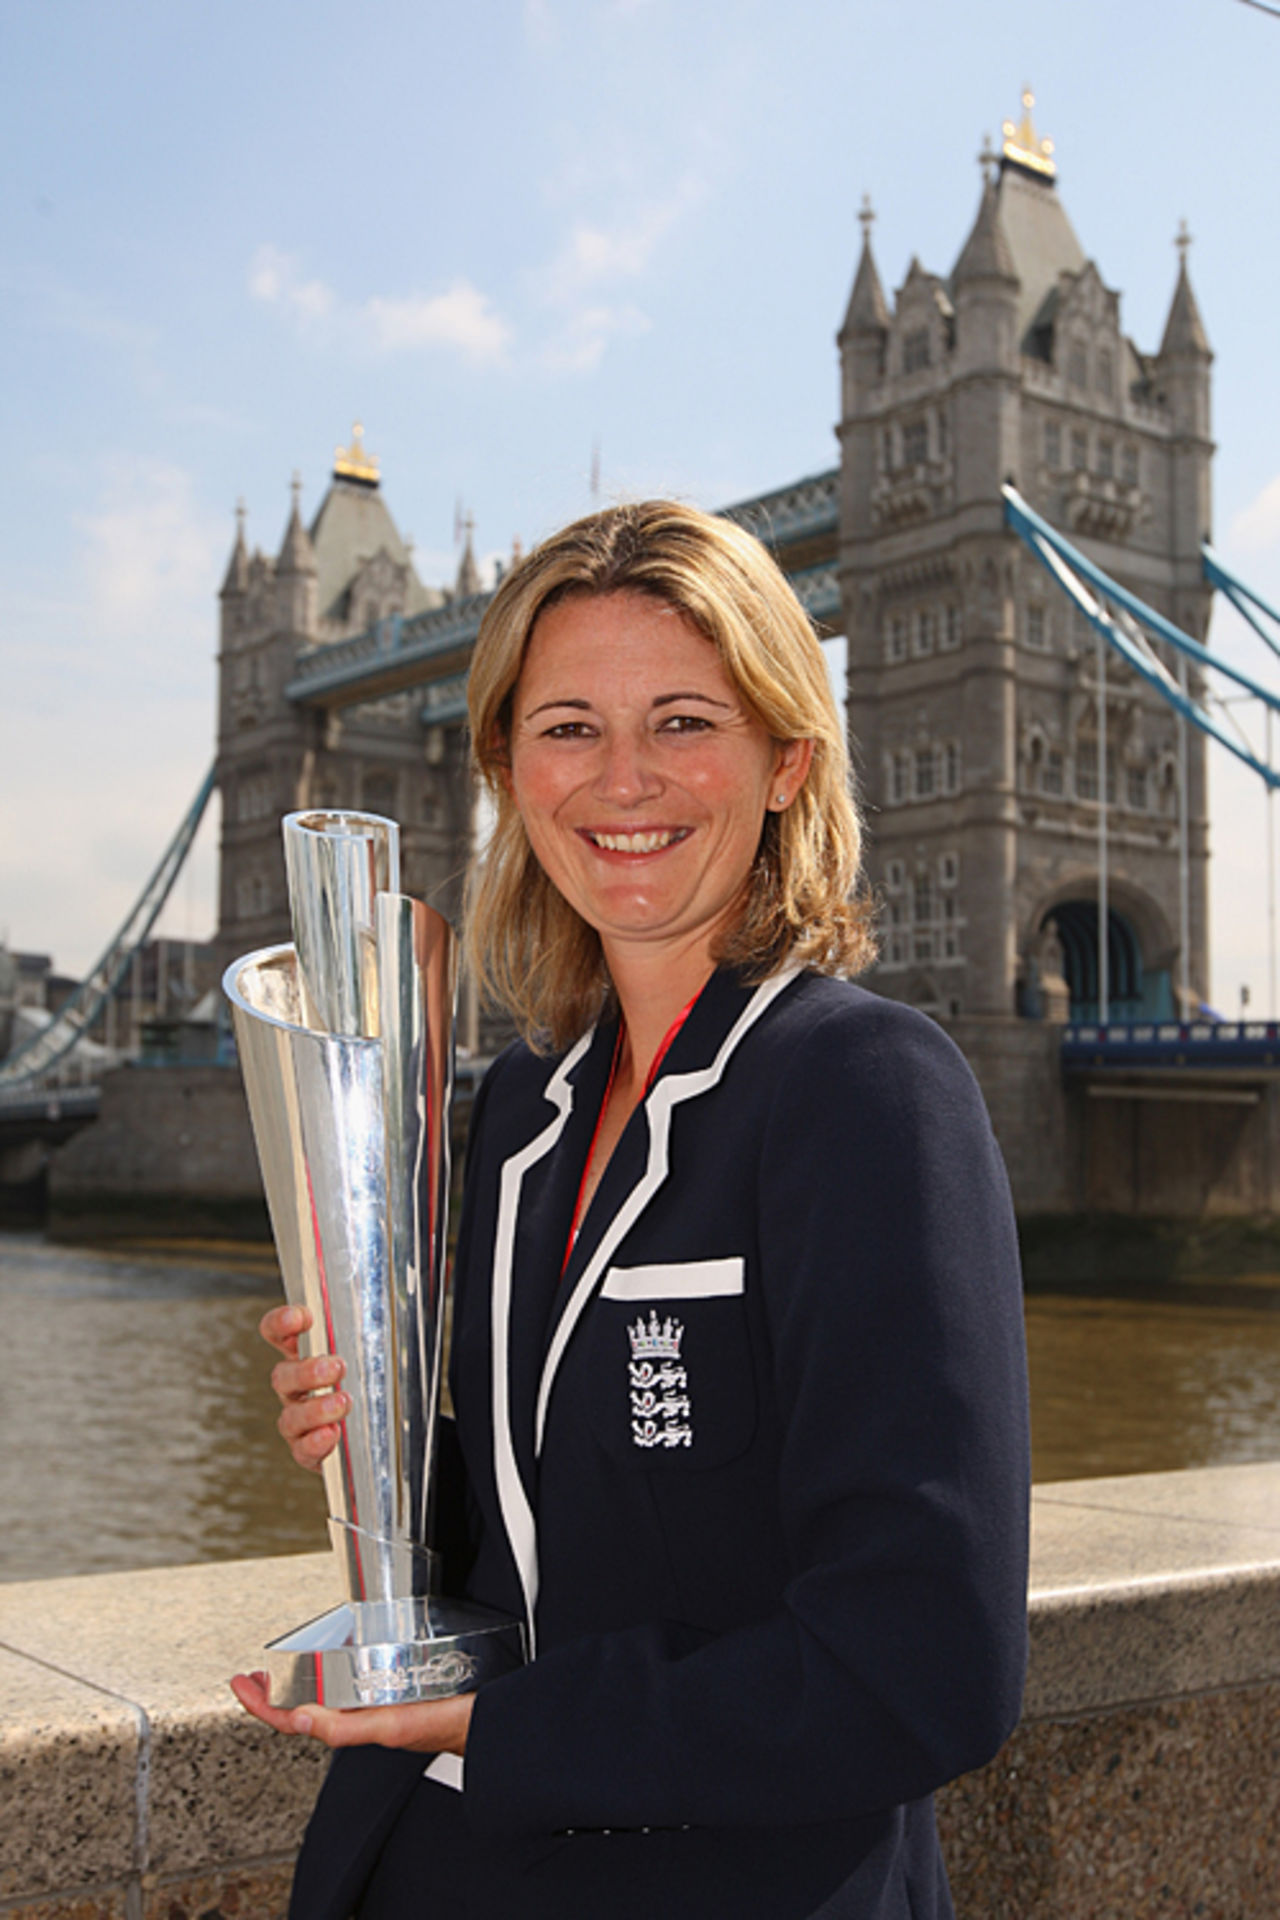 Charlotte Edwards poses with the ICC World Twenty20 trophy in front of Tower Bridge, London, June 22, 2009